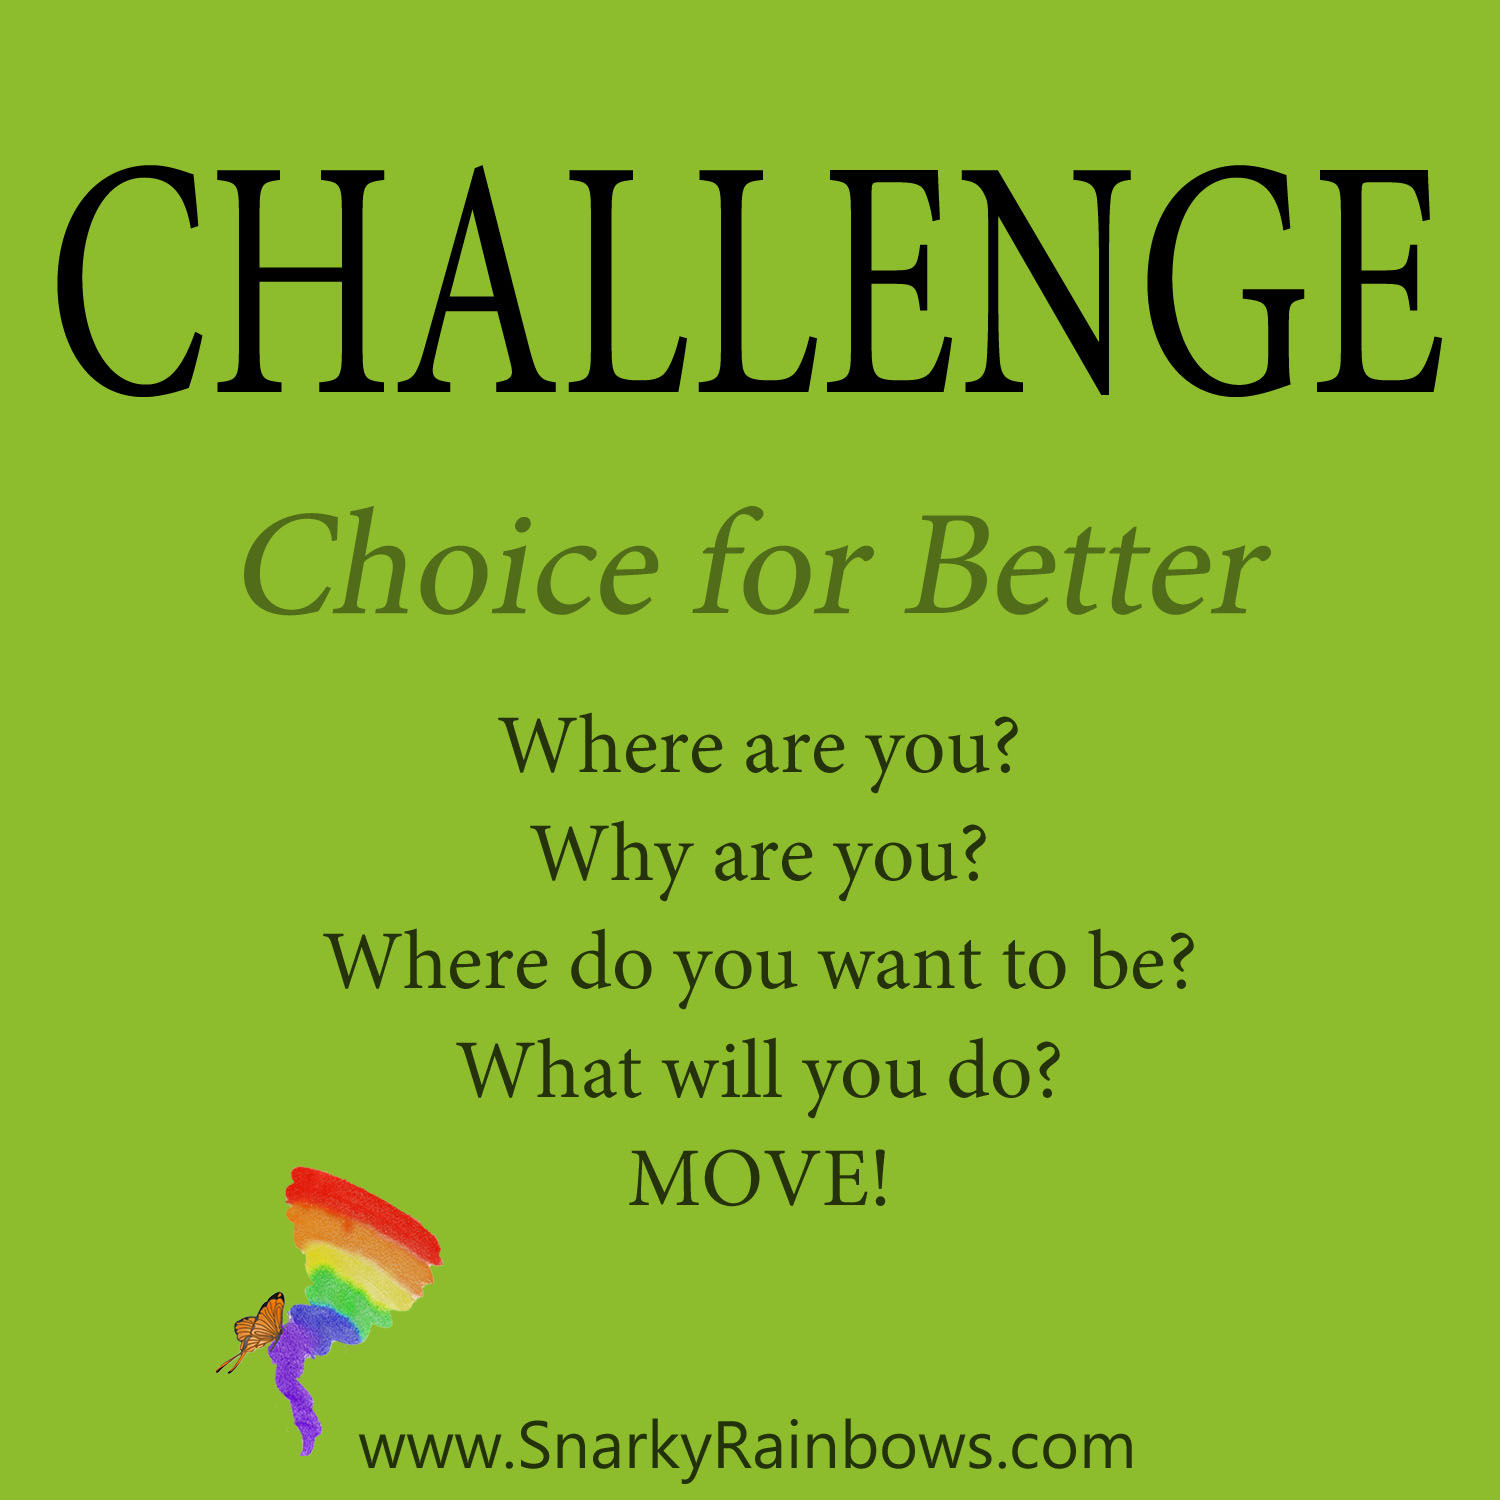 Daily challenge - choice for better